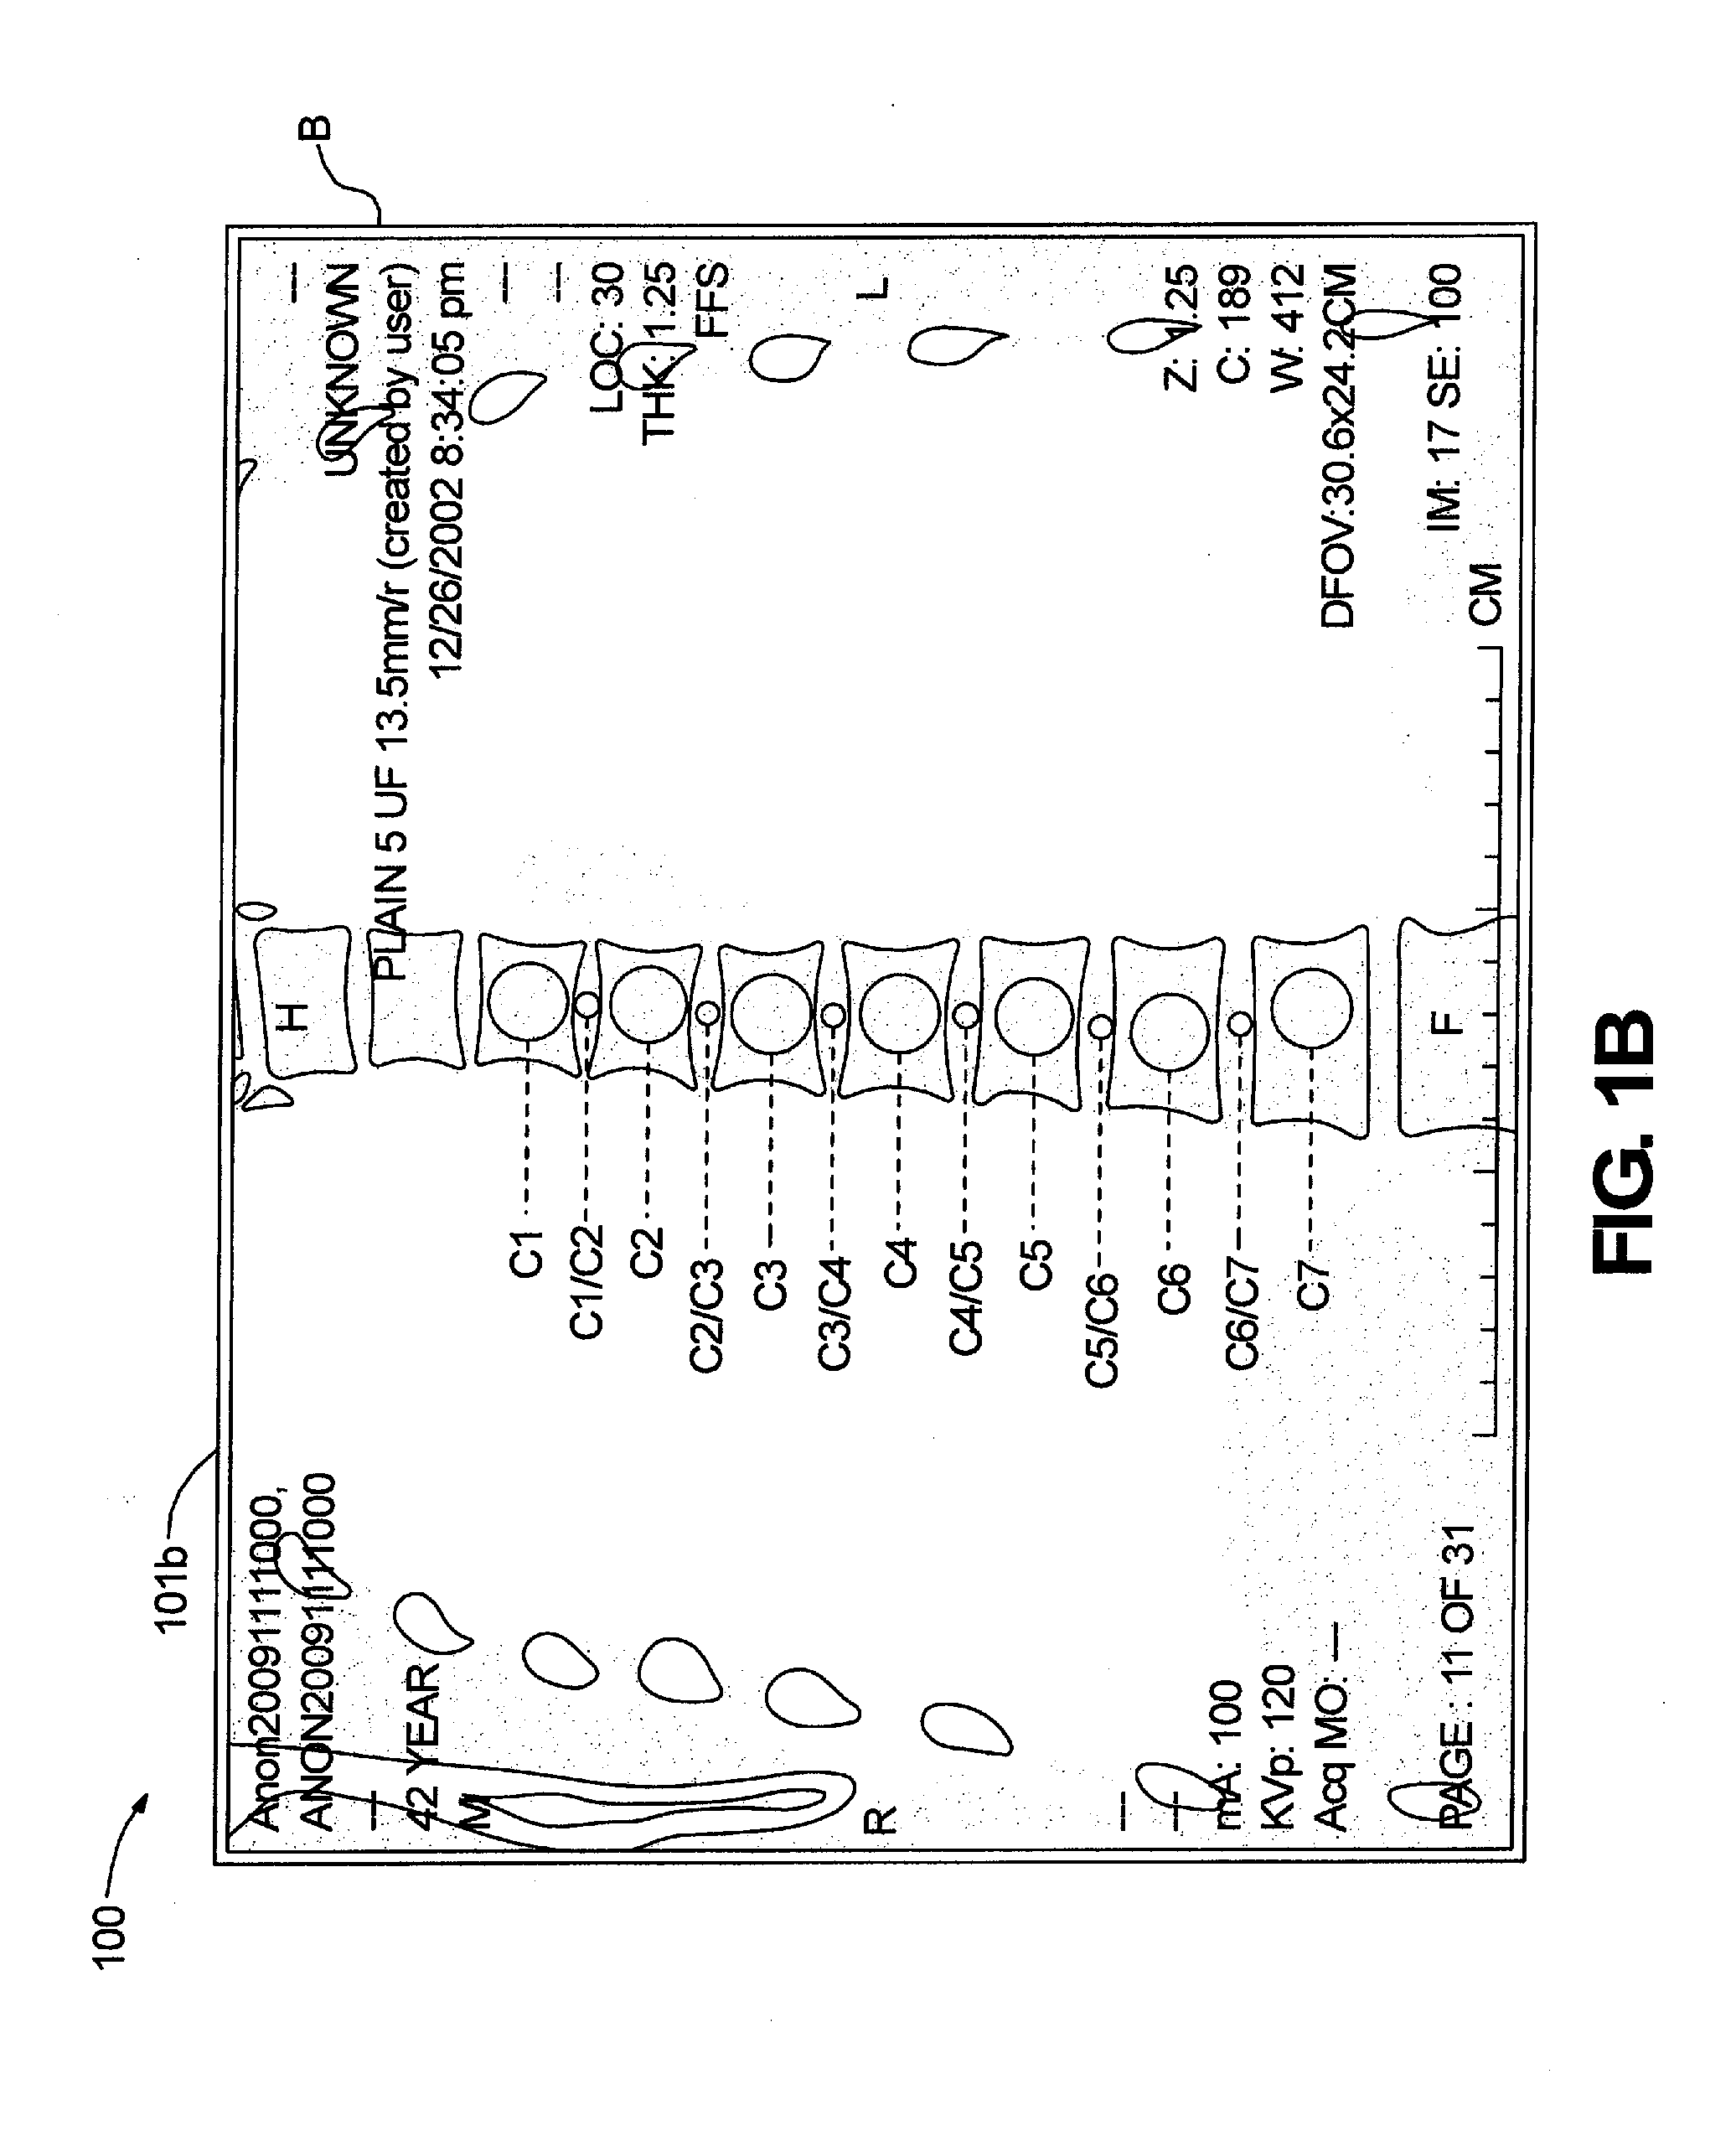 System and Method for Propagation of Spine Labeling